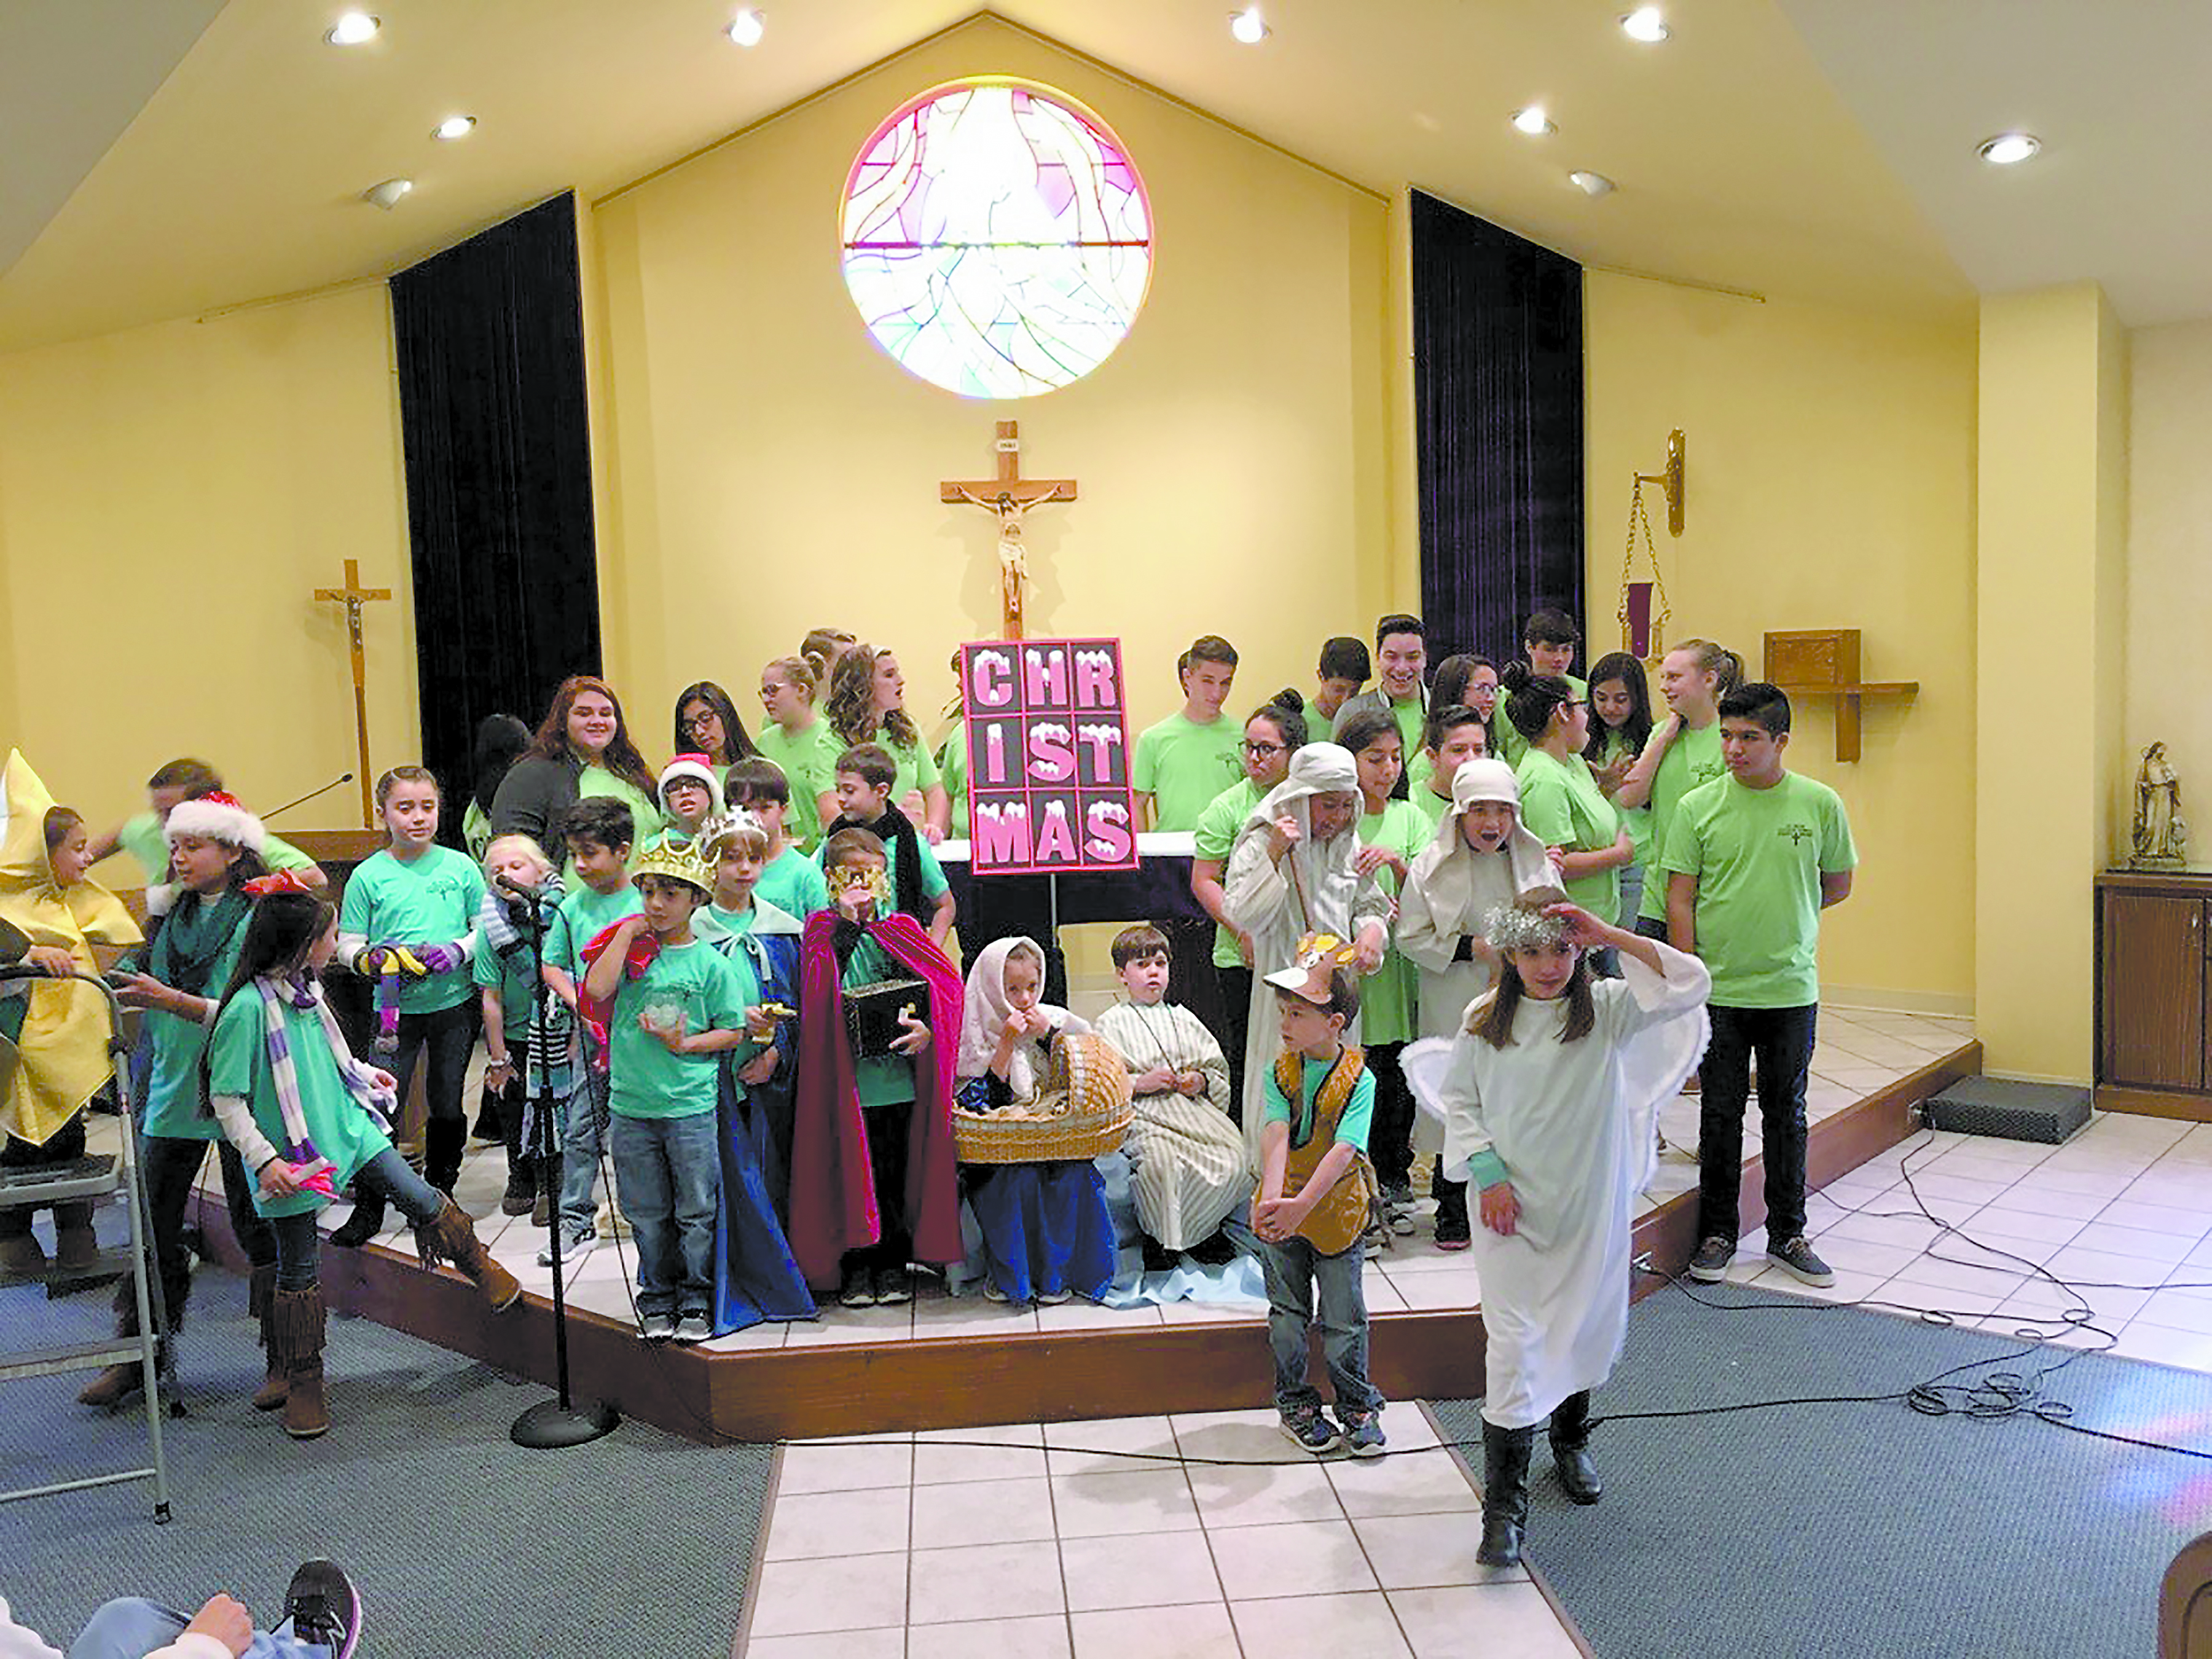 AMORY – St. Helen Parish children prepare at the altar to present the play “The Christmas Window” after Mass Sunday, Dec.11, to celebrate Grandparents’ Day at Christmastime. (Photo by Jean Pinkley)